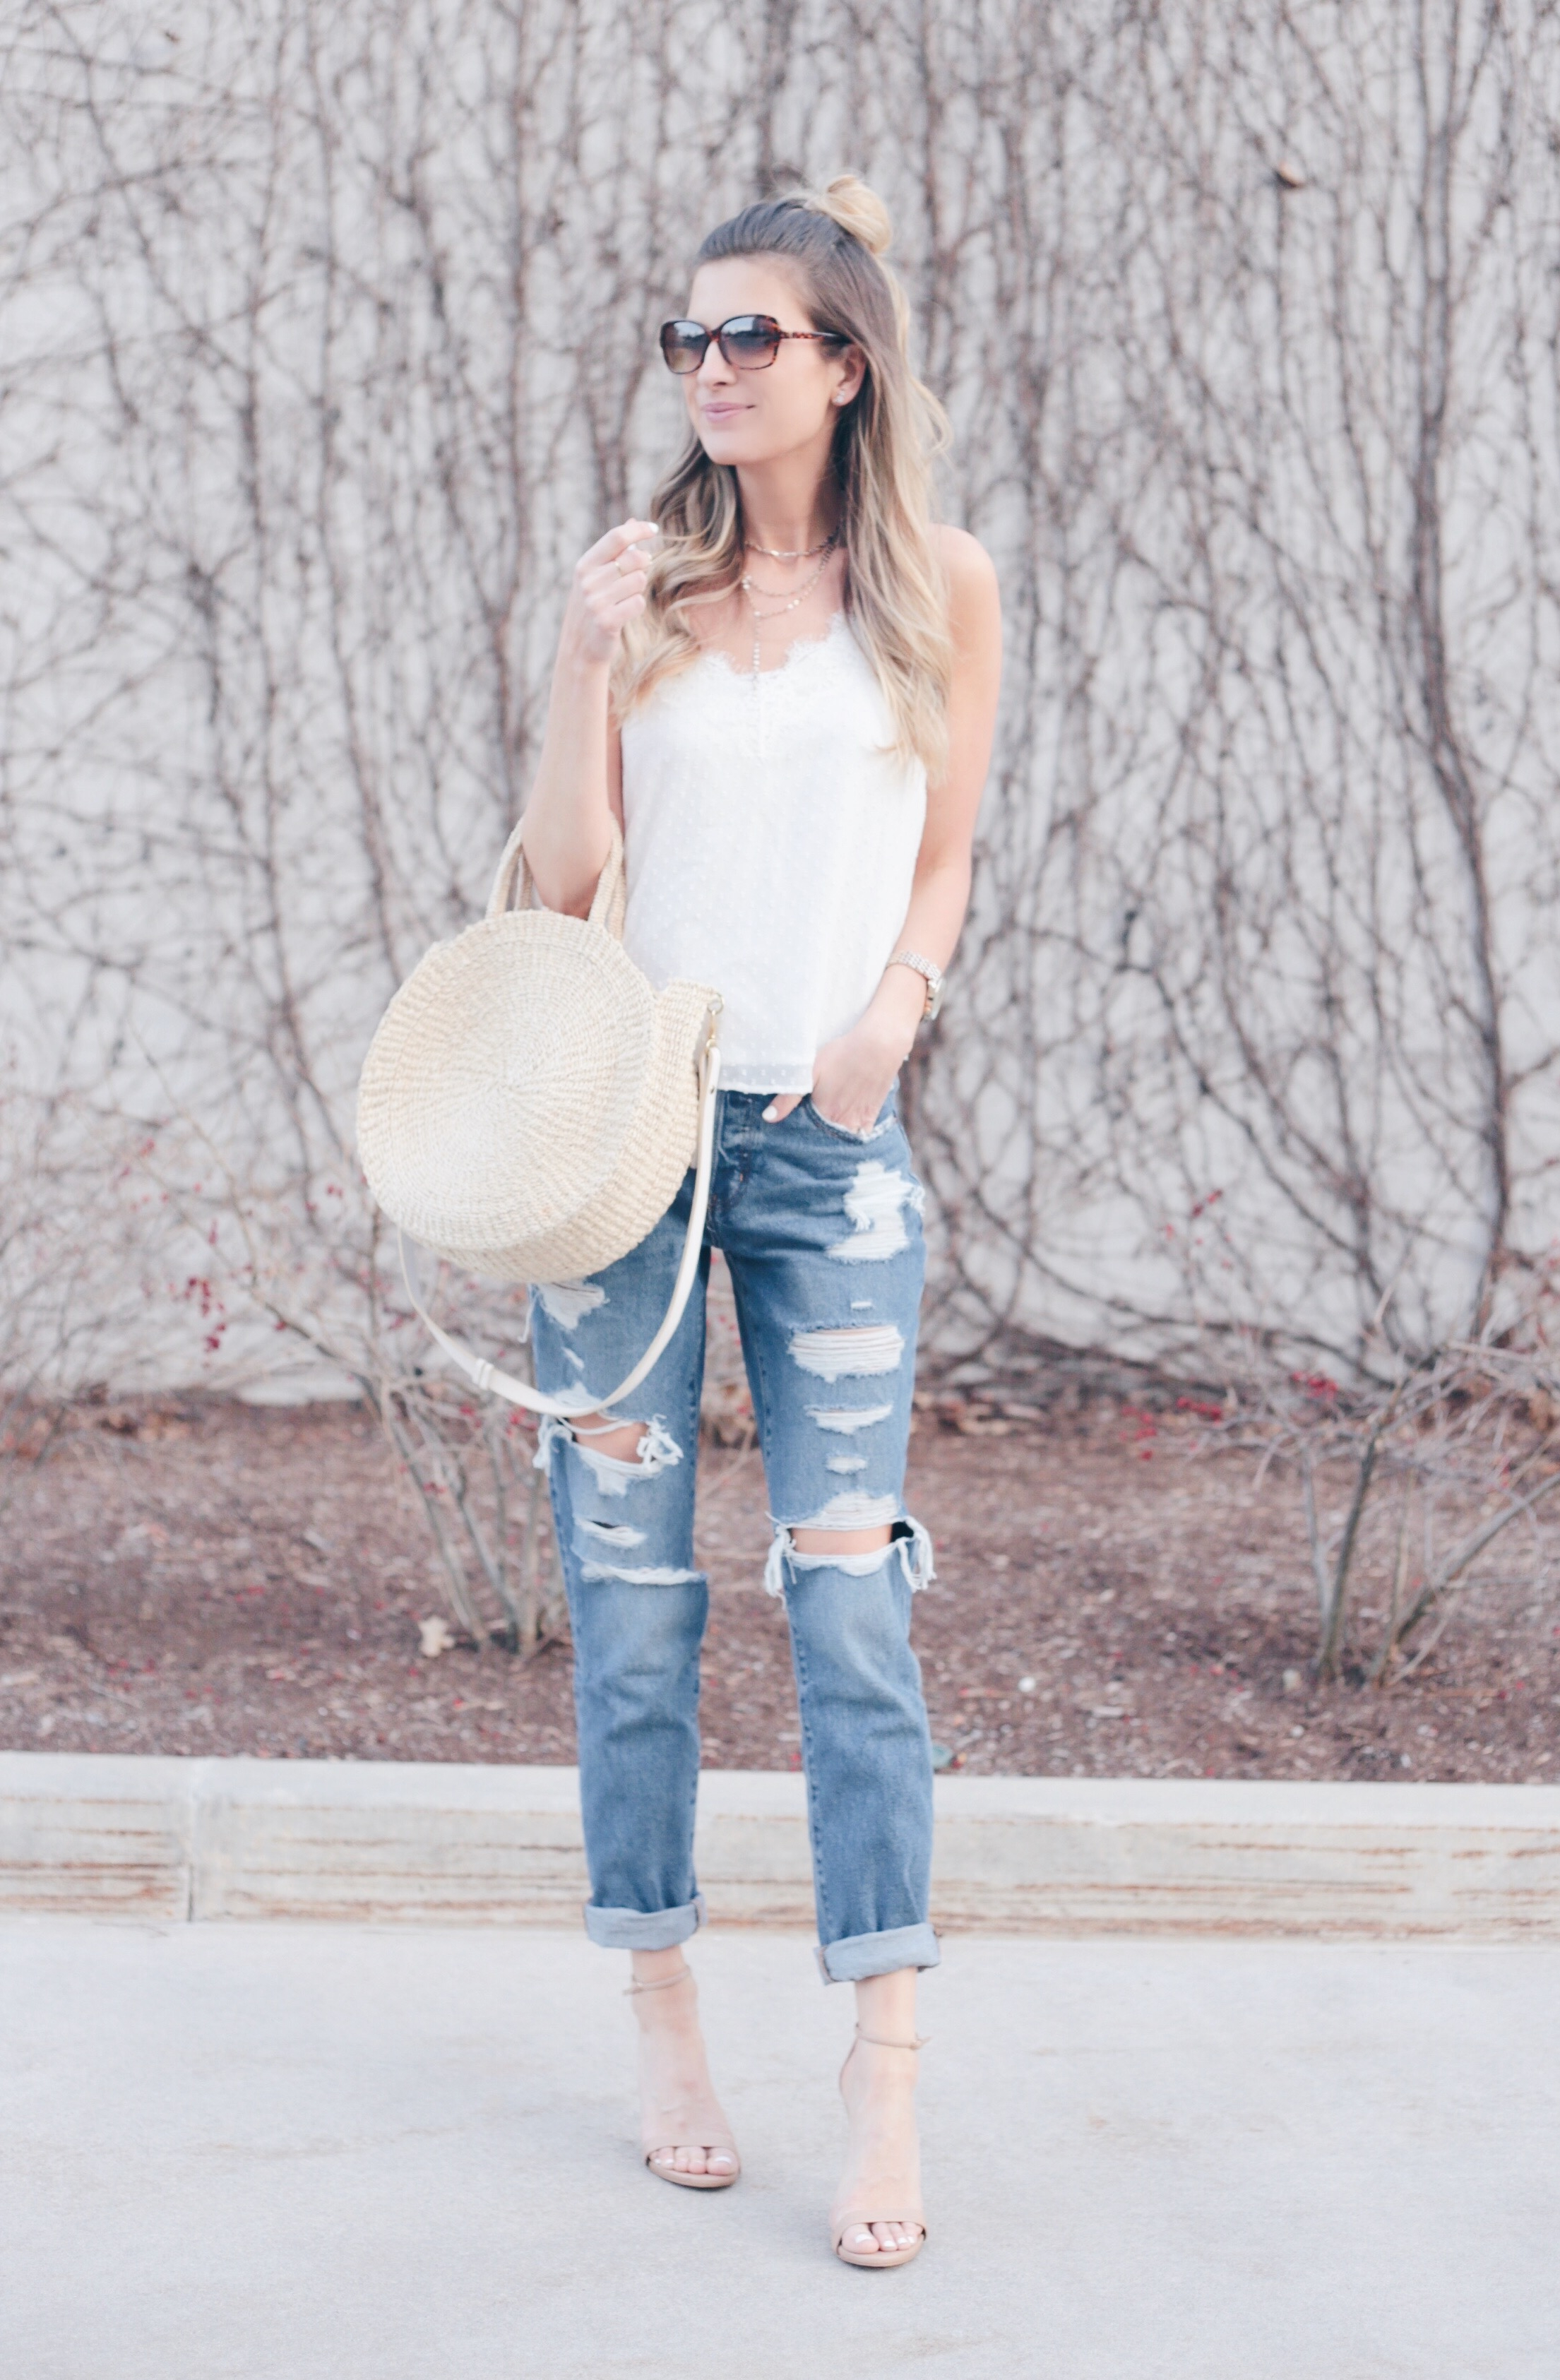  spring transition outfits with denim - boyfriend jeans outfit on pinteresting plans